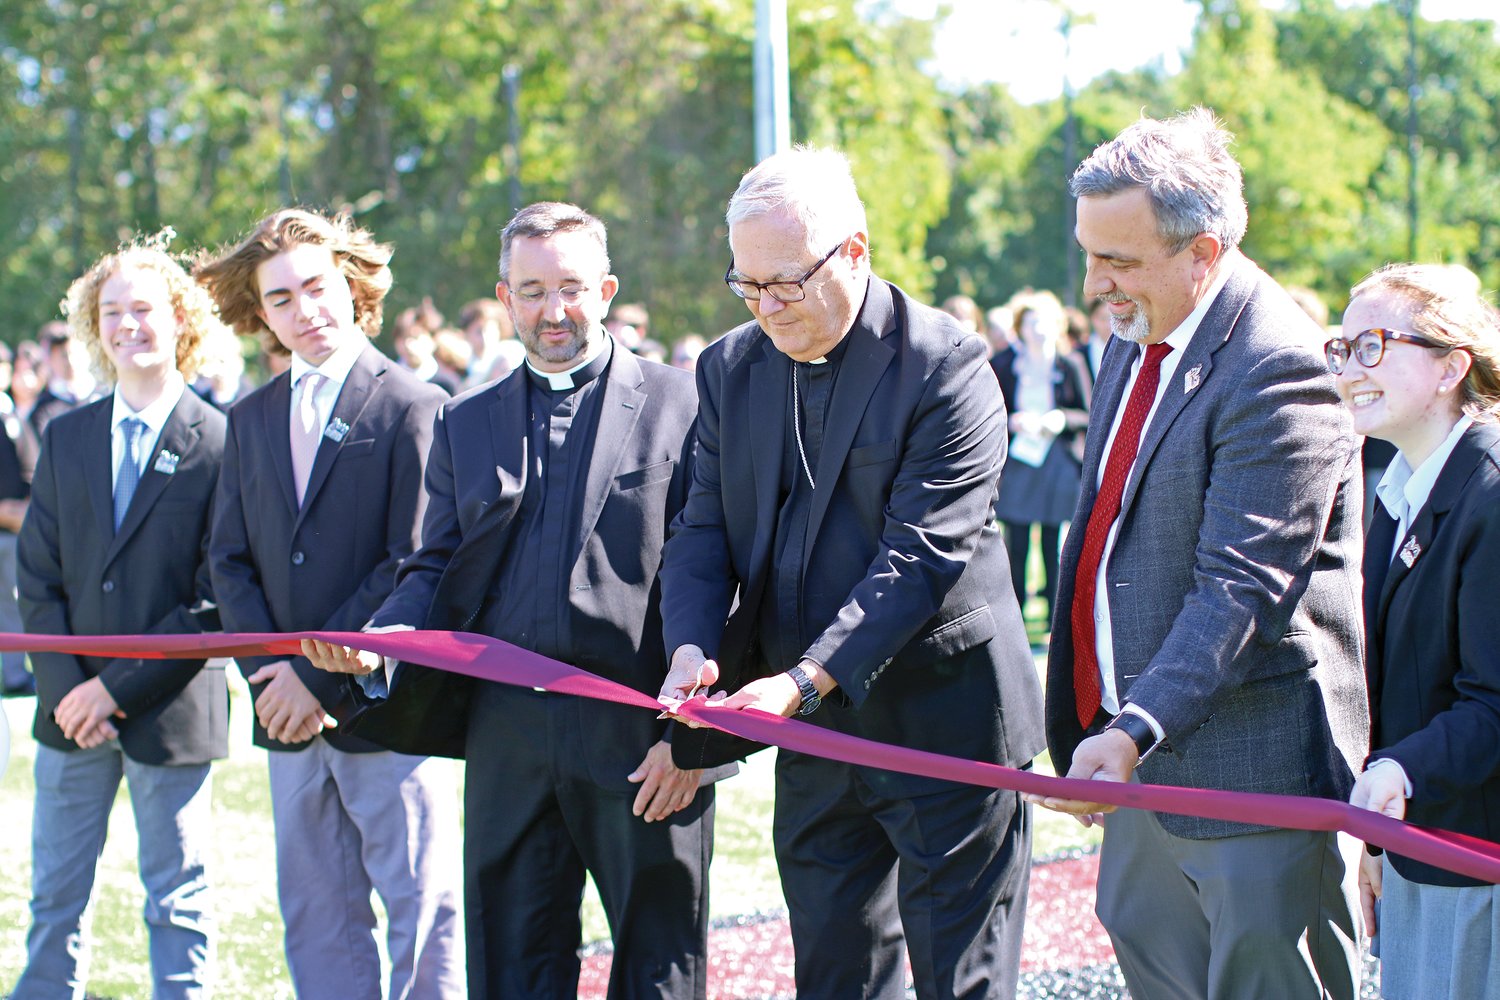 Bishop Thomas J. Tobin joins The Prout School Principal David Estes, right, Father Carl Fisette, school chaplain, left, and students in the dedication and blessing of The Meghan C. Cooney Field on Wednesday, Sept. 14 in Wakefield.